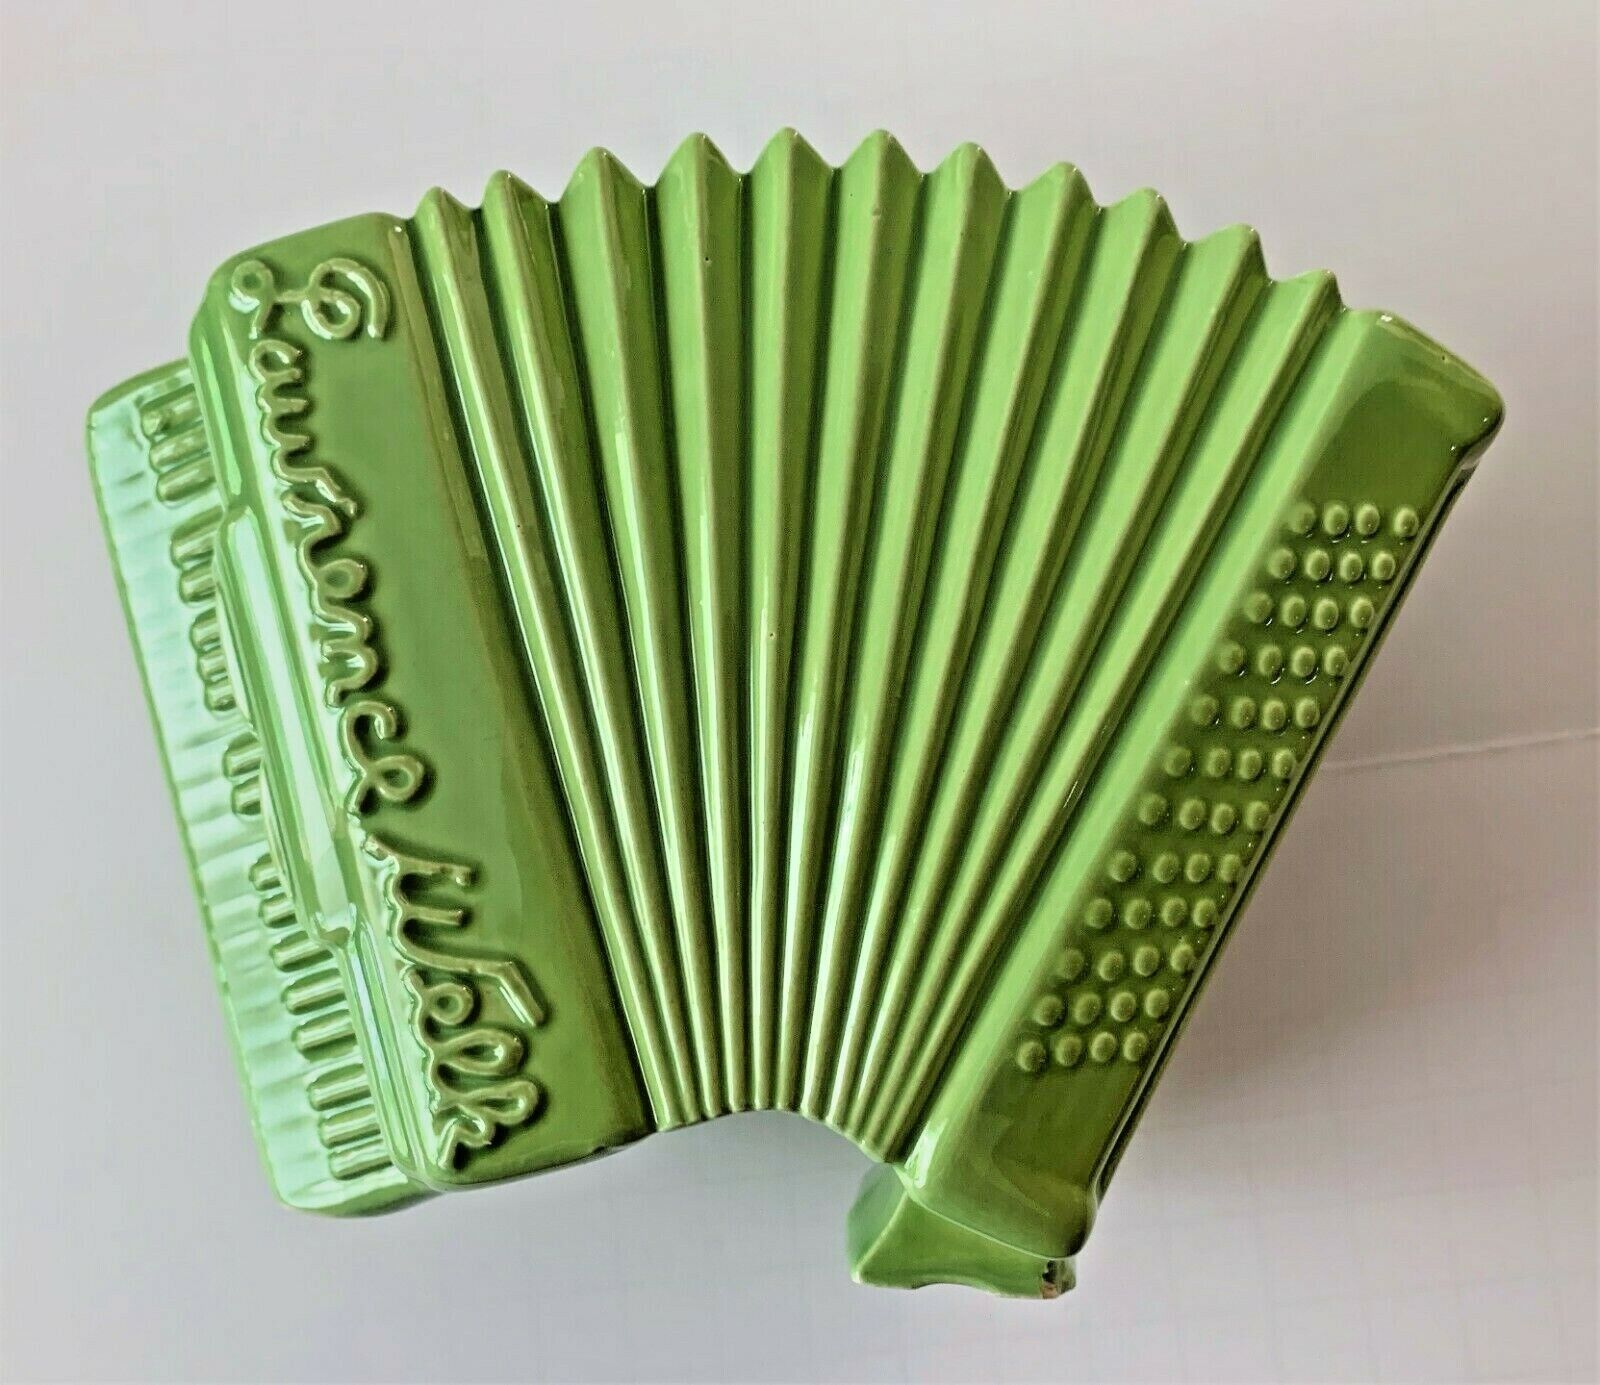 Lawrence Welk 2 Green, Ceramic Planters/Accordion Shape/1950's/Great Condition! Без бренда